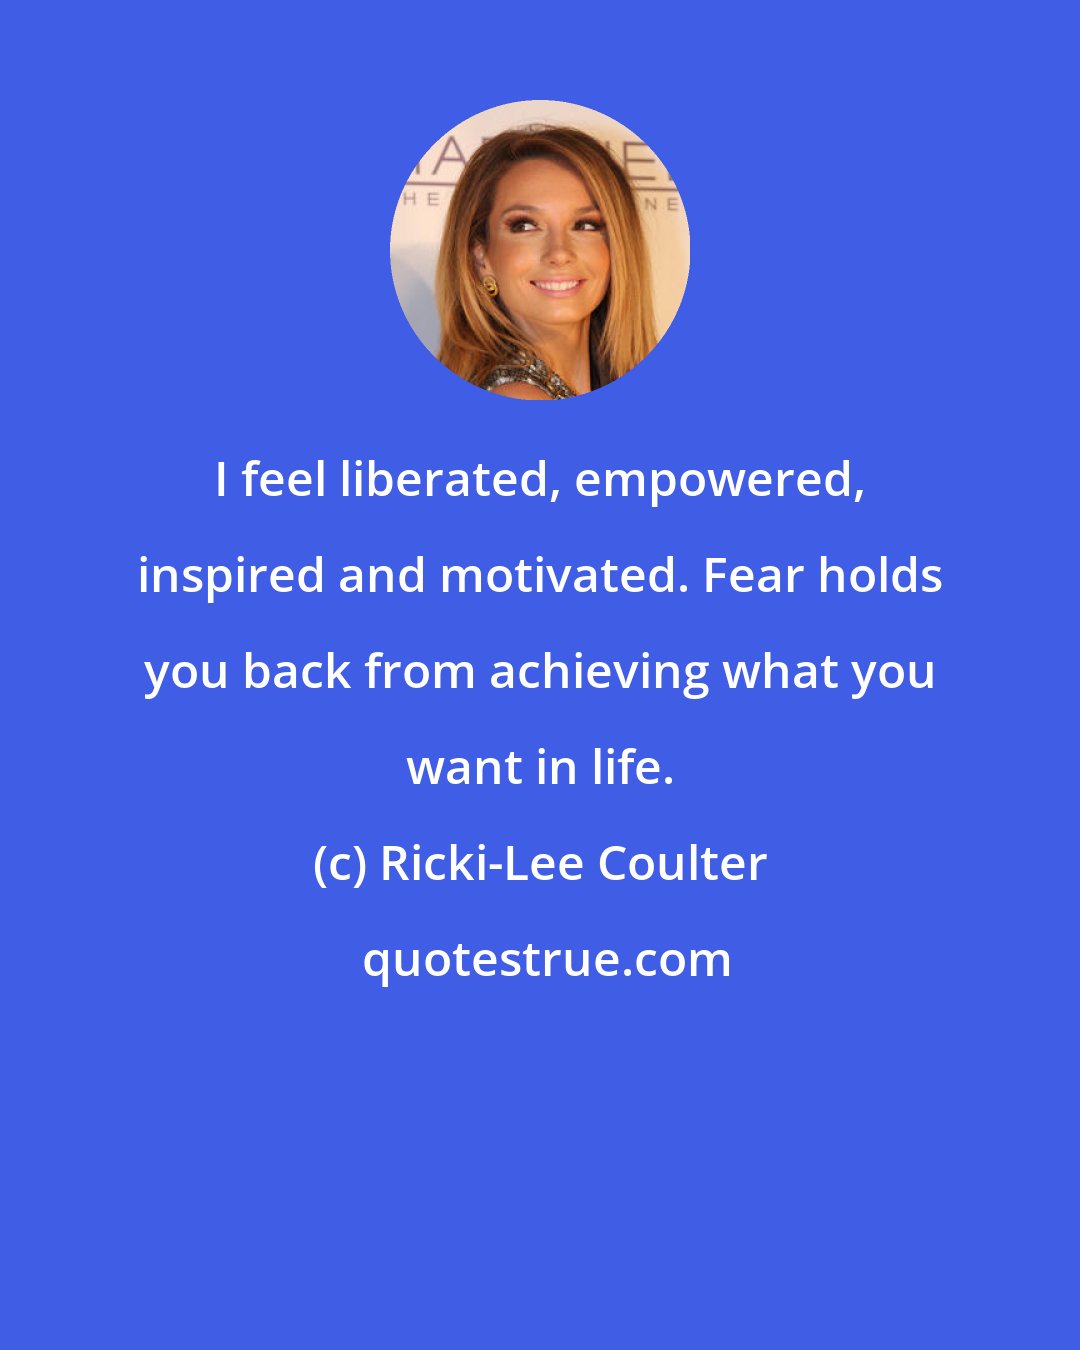 Ricki-Lee Coulter: I feel liberated, empowered, inspired and motivated. Fear holds you back from achieving what you want in life.